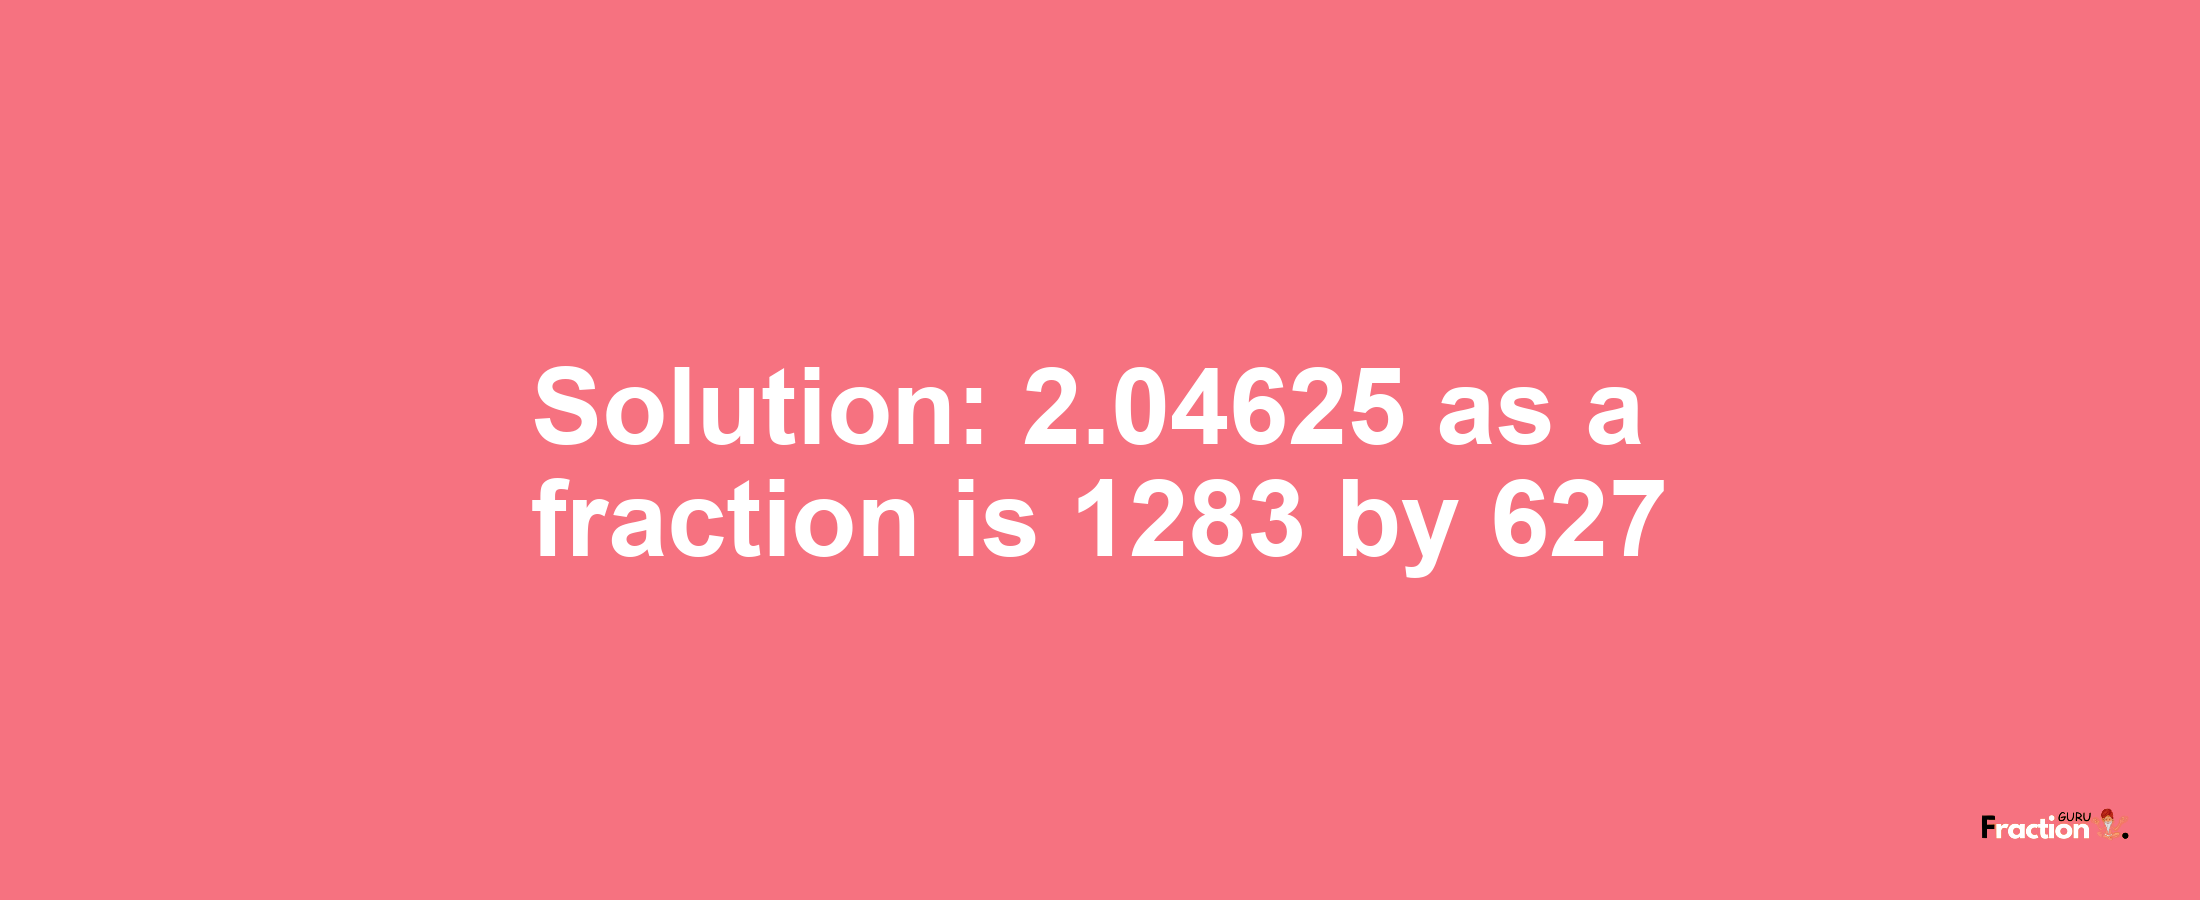 Solution:2.04625 as a fraction is 1283/627